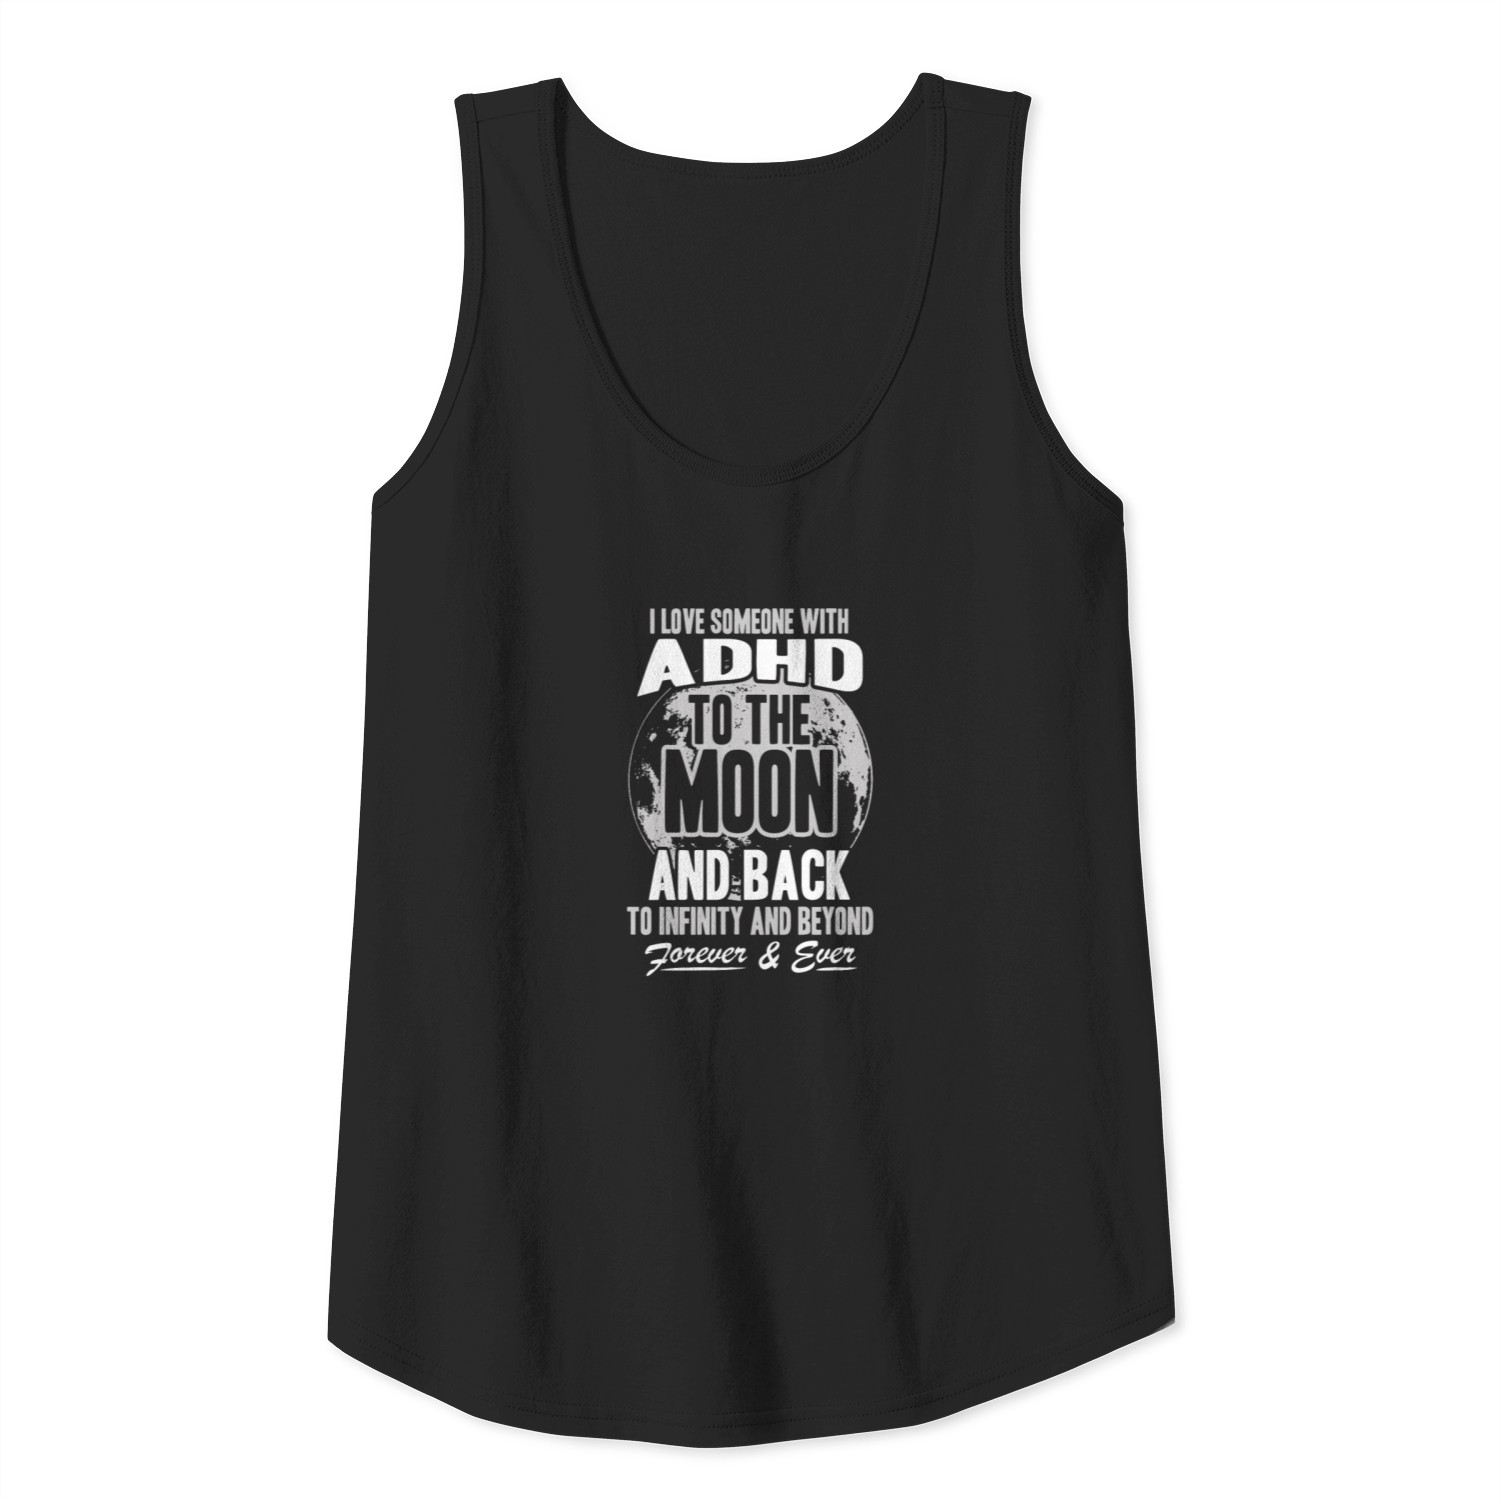 ADHD - I Love Someone With ADHD To The Moon Tank Top